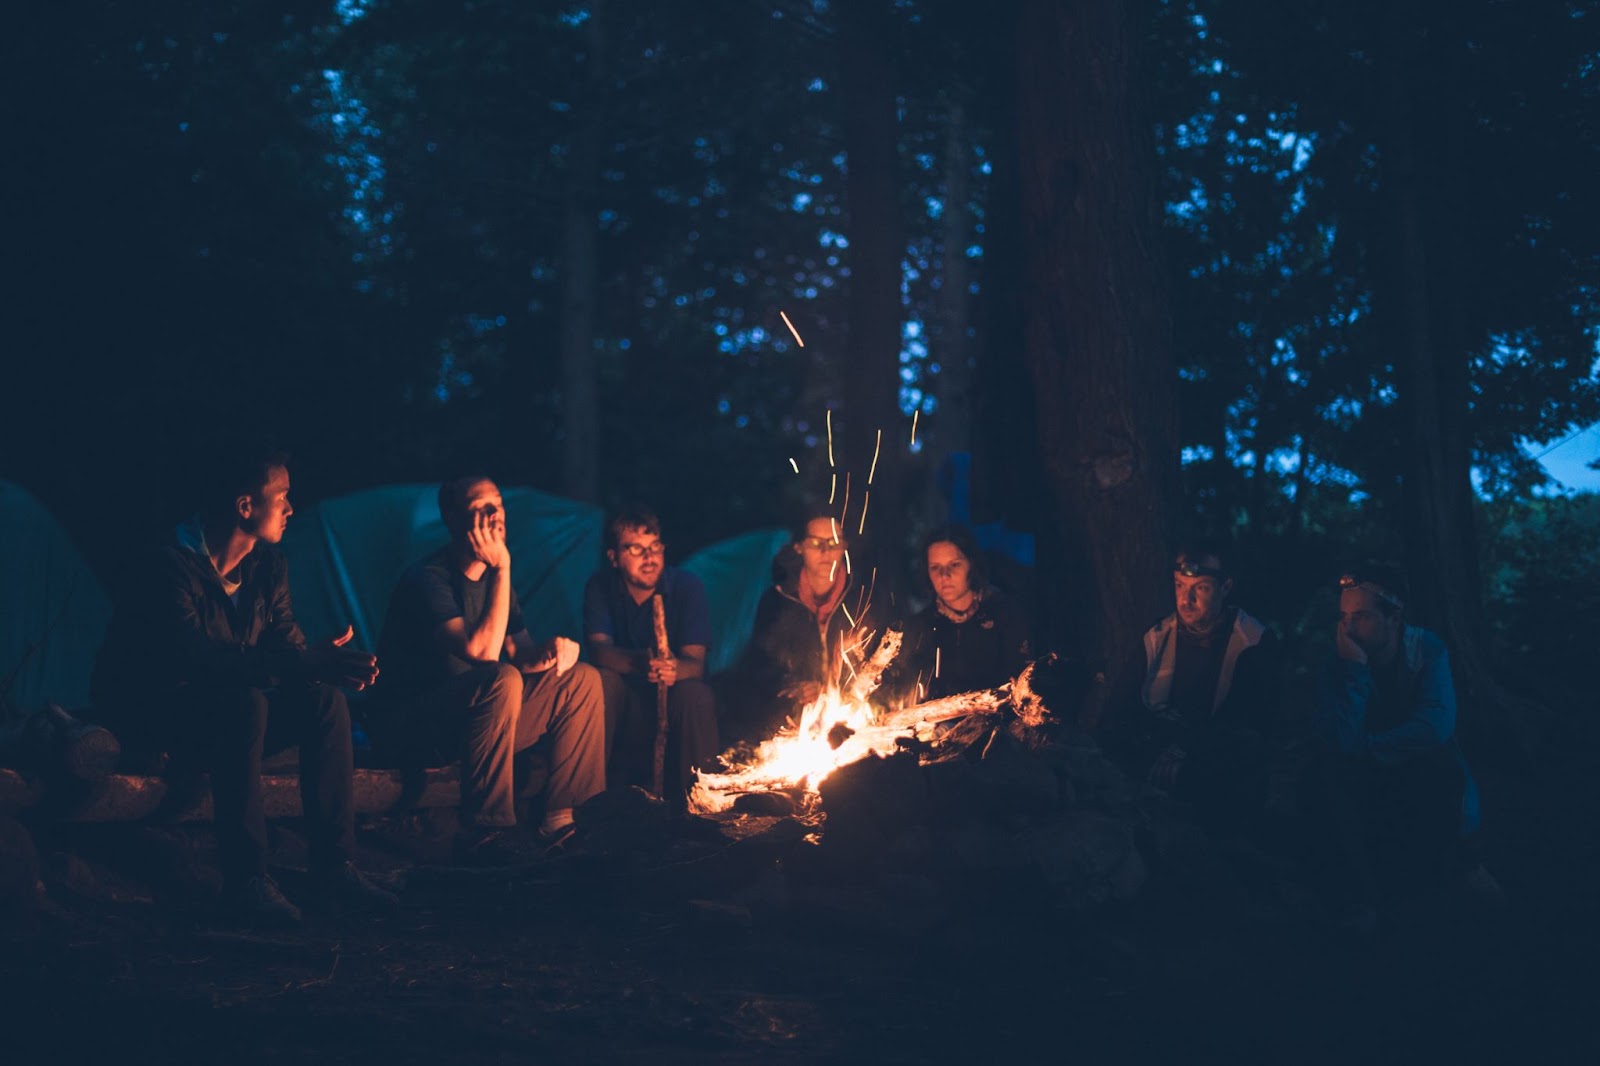 A group of people telling stories around a fire.